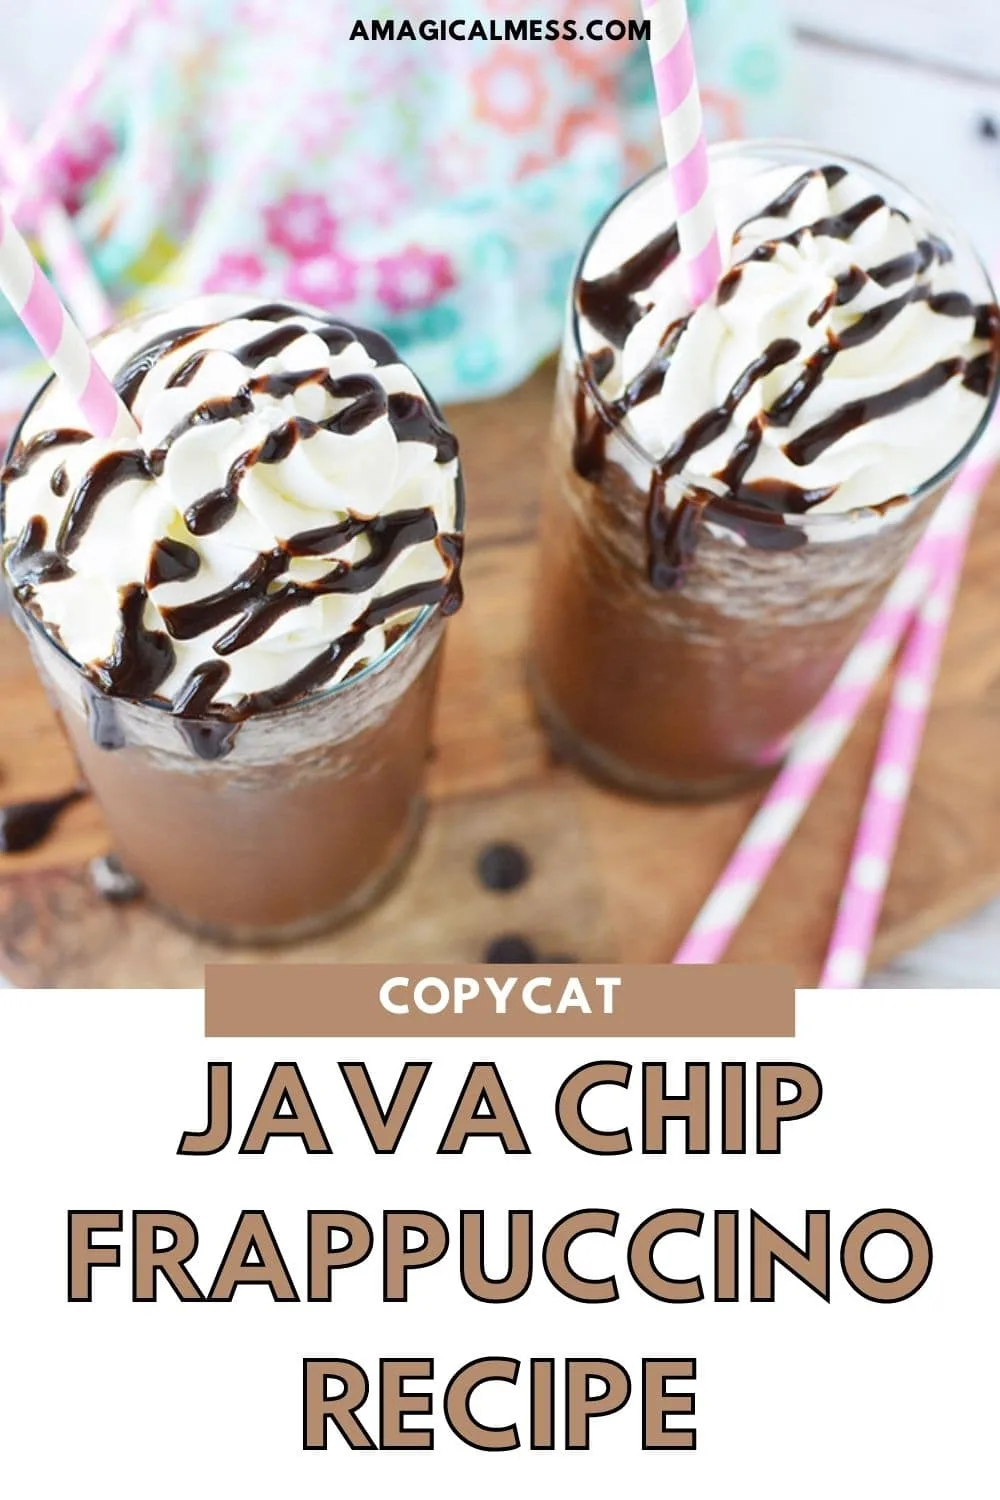 Java chip frappuccinos topped with whipped cream and syrup.